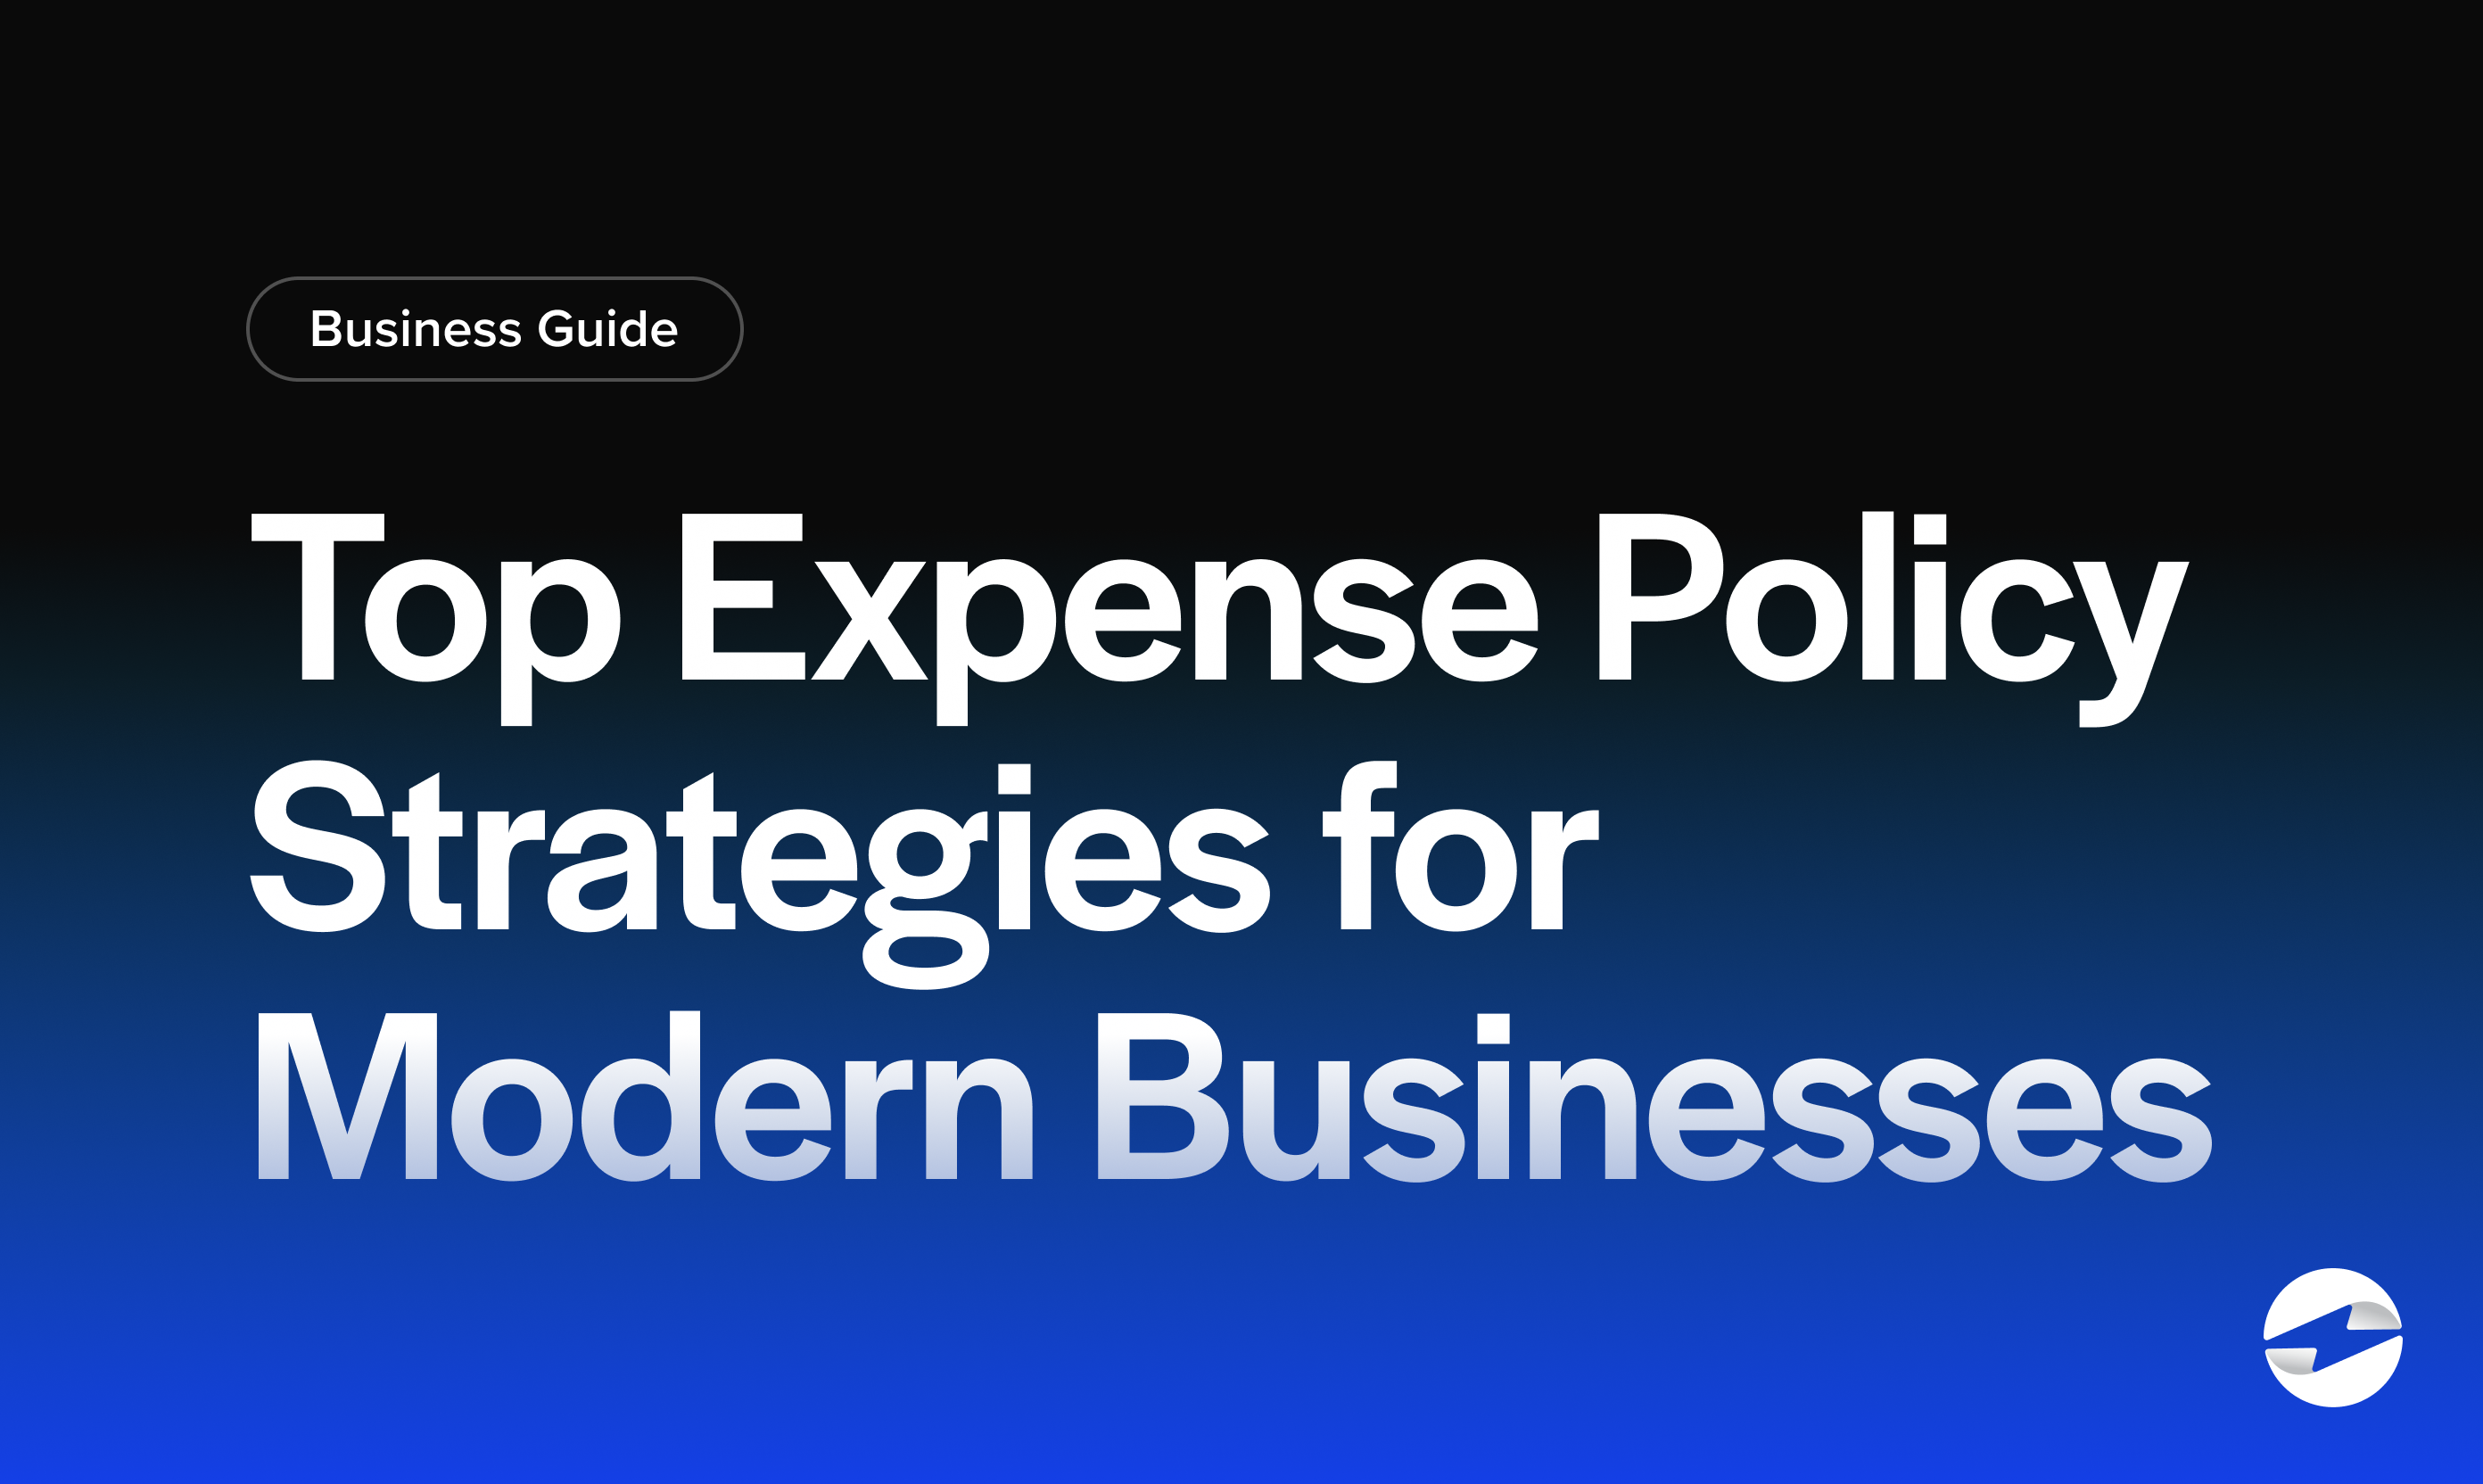 Top Expense Policy Strategies for Modern Businesses